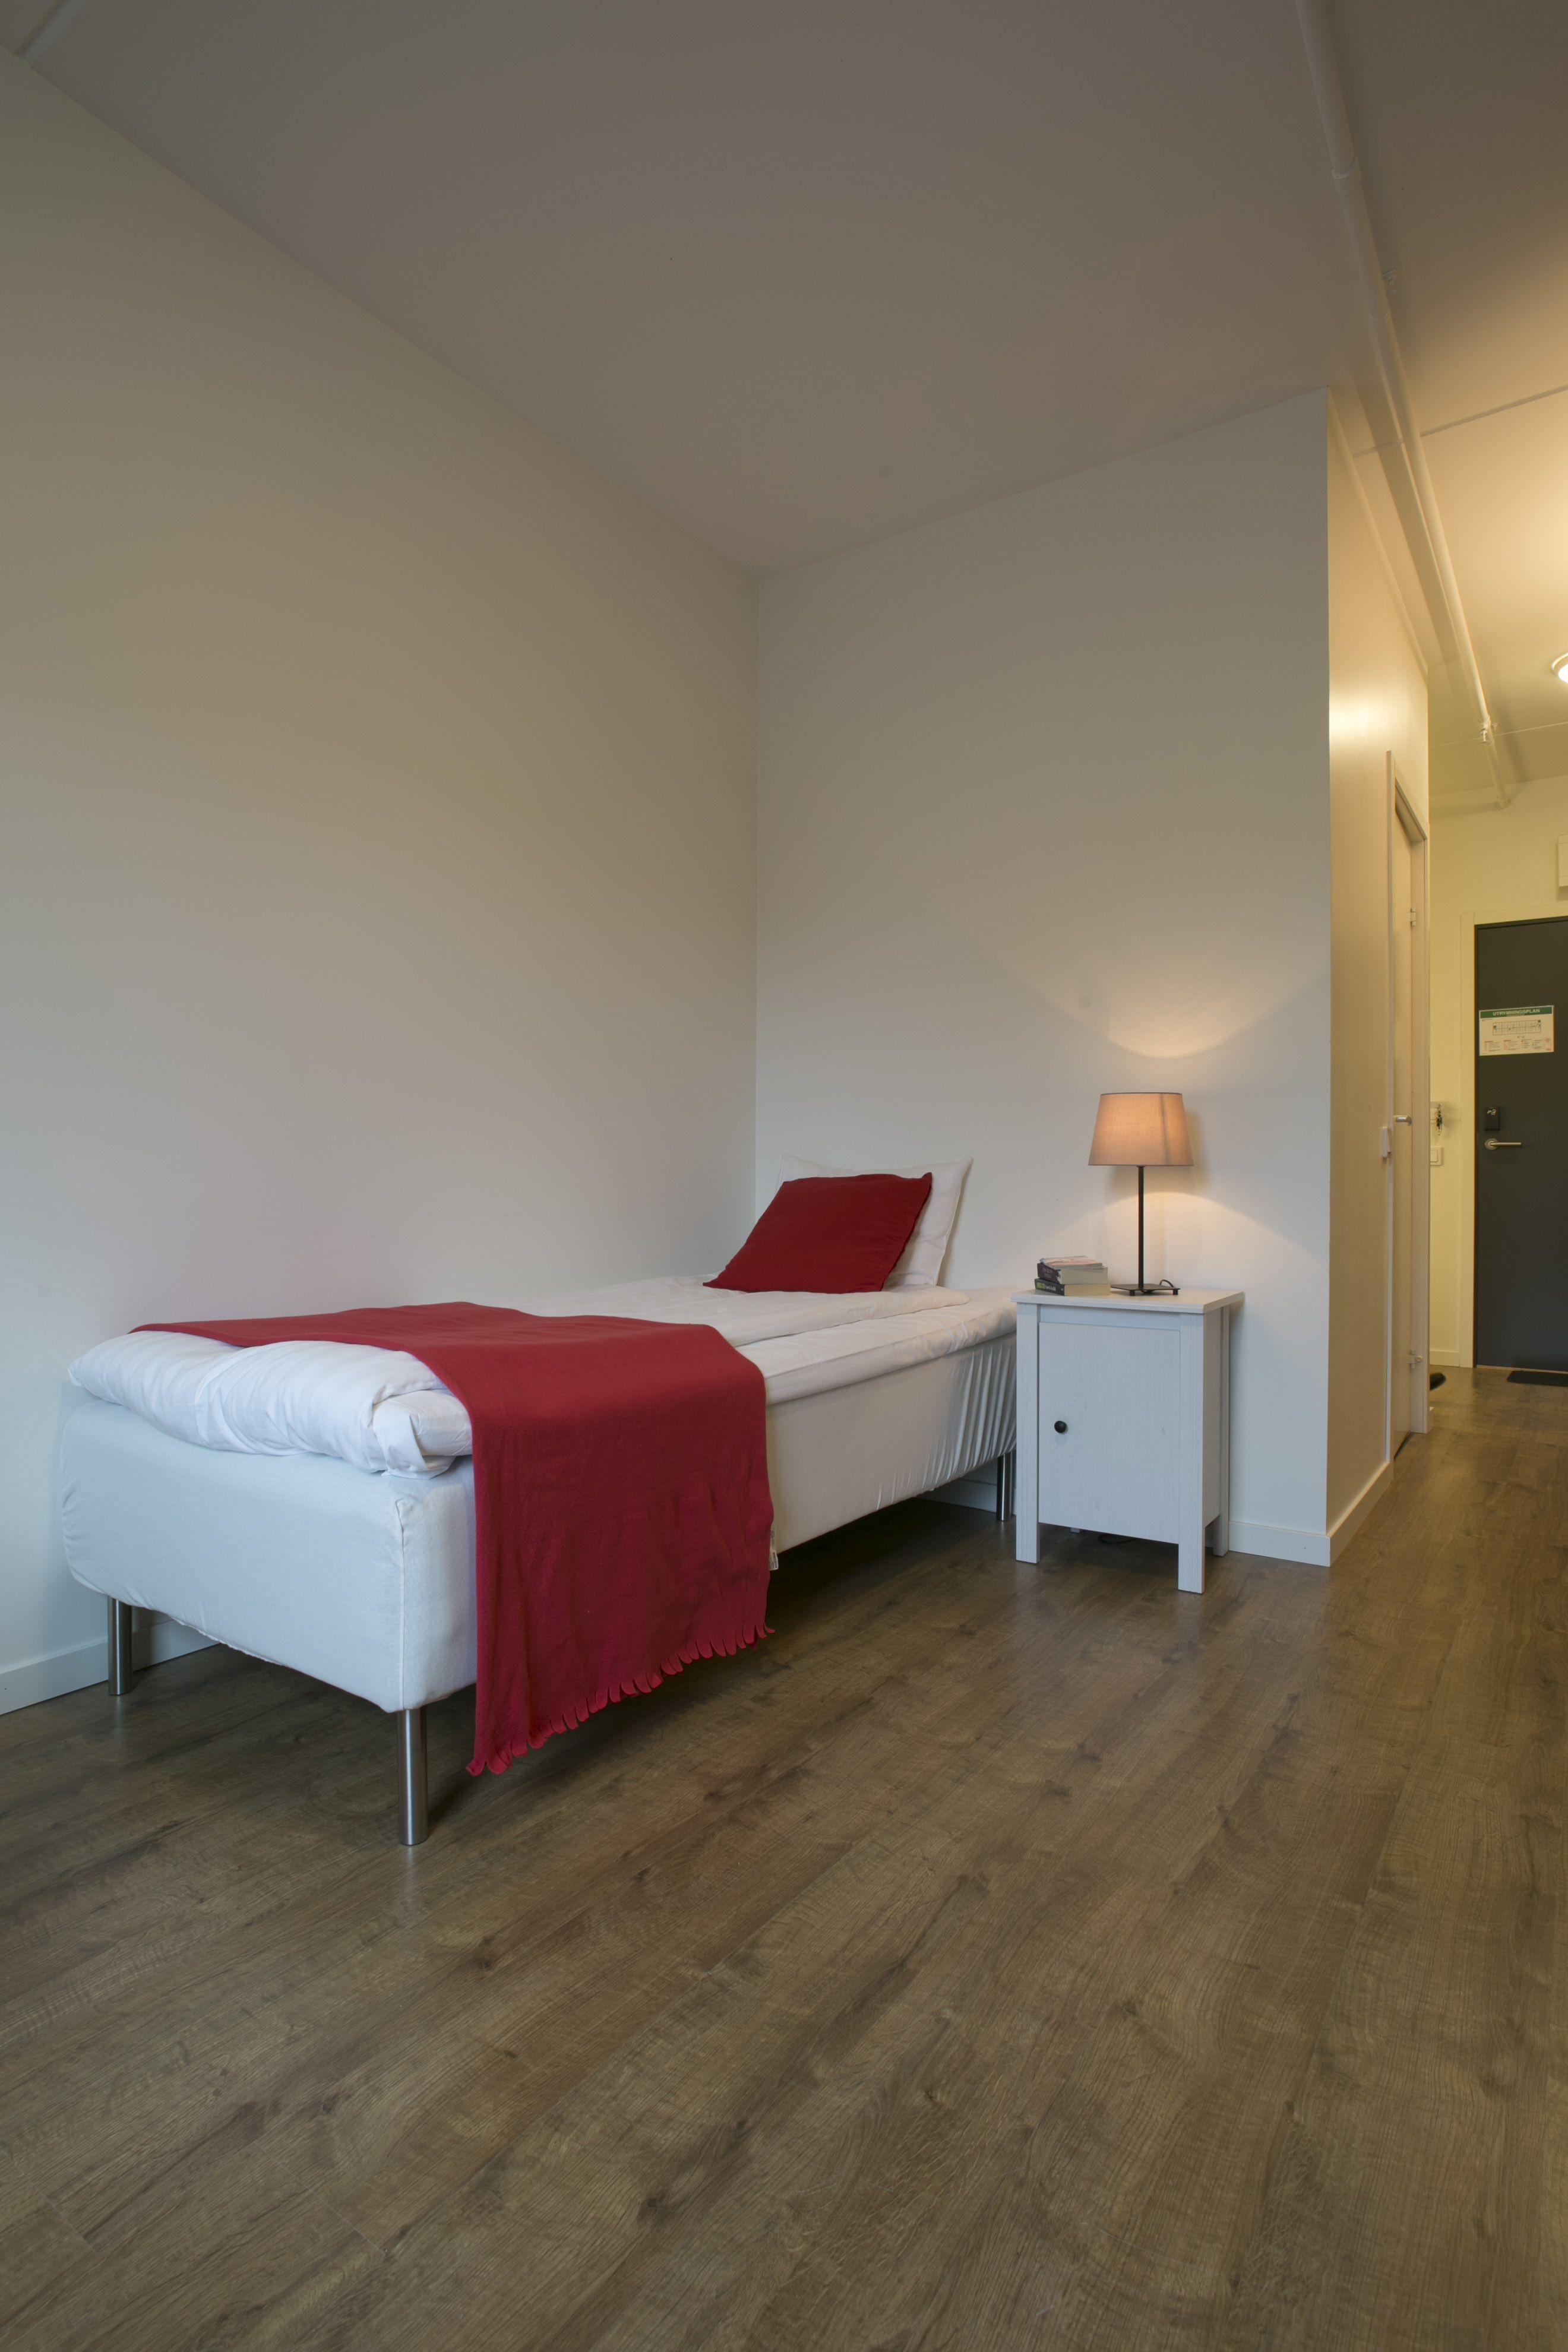 Our studio apartments is 24 sqm and have a fully equipped kitchenette with a stove, fridge with freezer and microwave, kettle, dining table with chairs and a separate sitting area. 1 x 90 cm bed with pillow, duvet and bedlinnen. Bathroom with a shower and towels. Wi-Fi and Smart-Tv in every apartment and wardrobe with mirror door. Laundry room with iron and ironing boards and garbage room on each floor. Free access to the gym Puls & Träning.